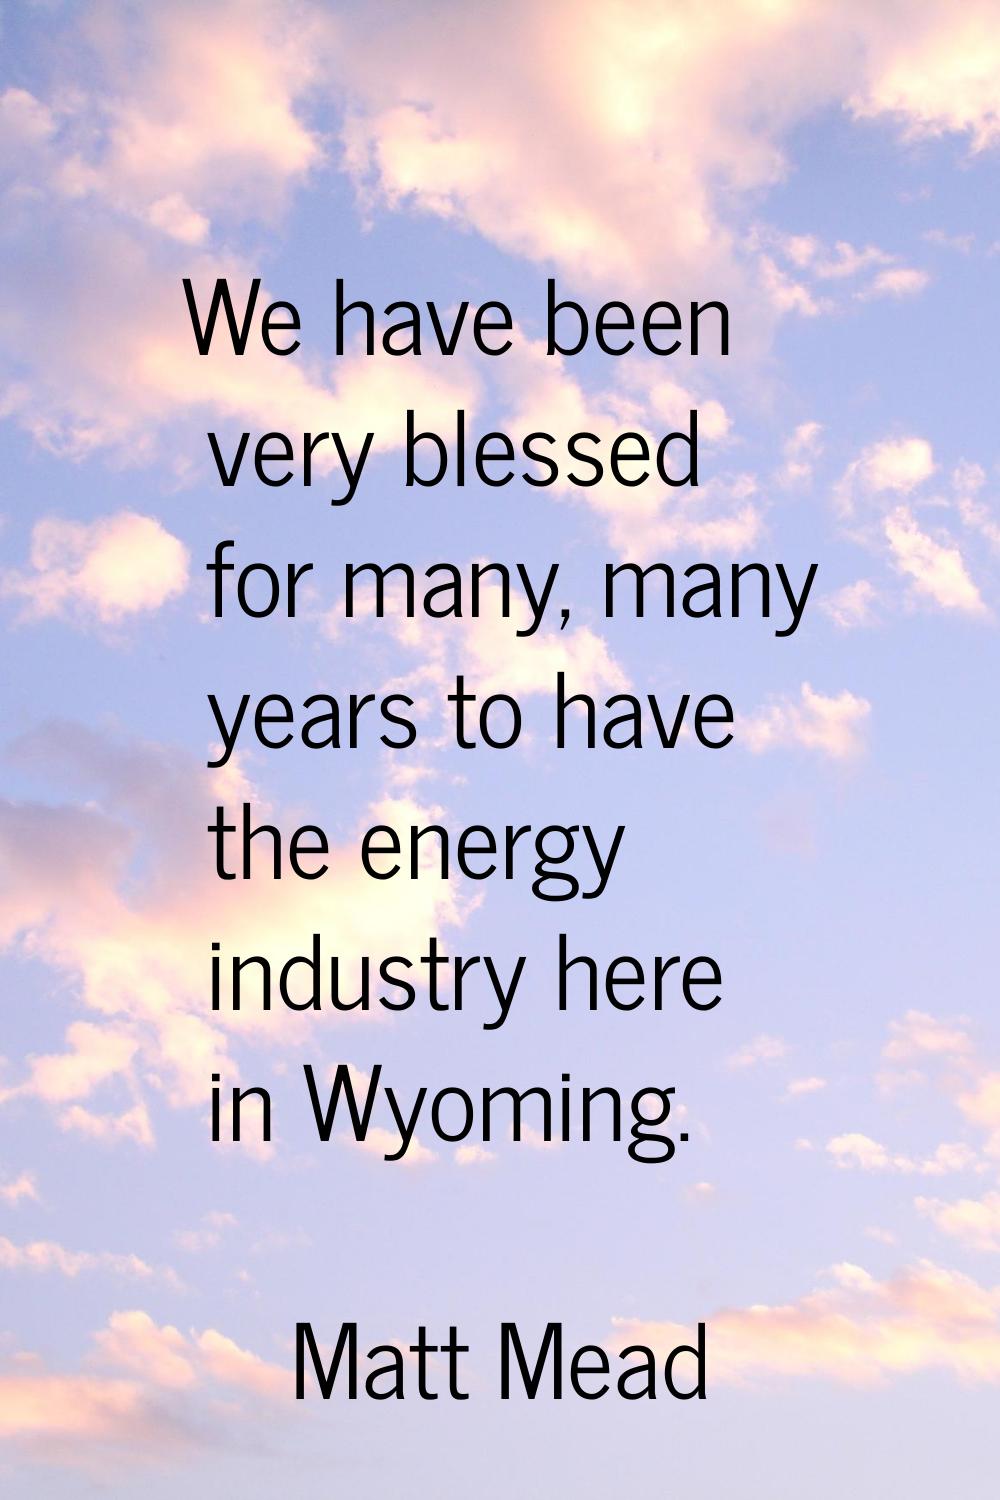 We have been very blessed for many, many years to have the energy industry here in Wyoming.